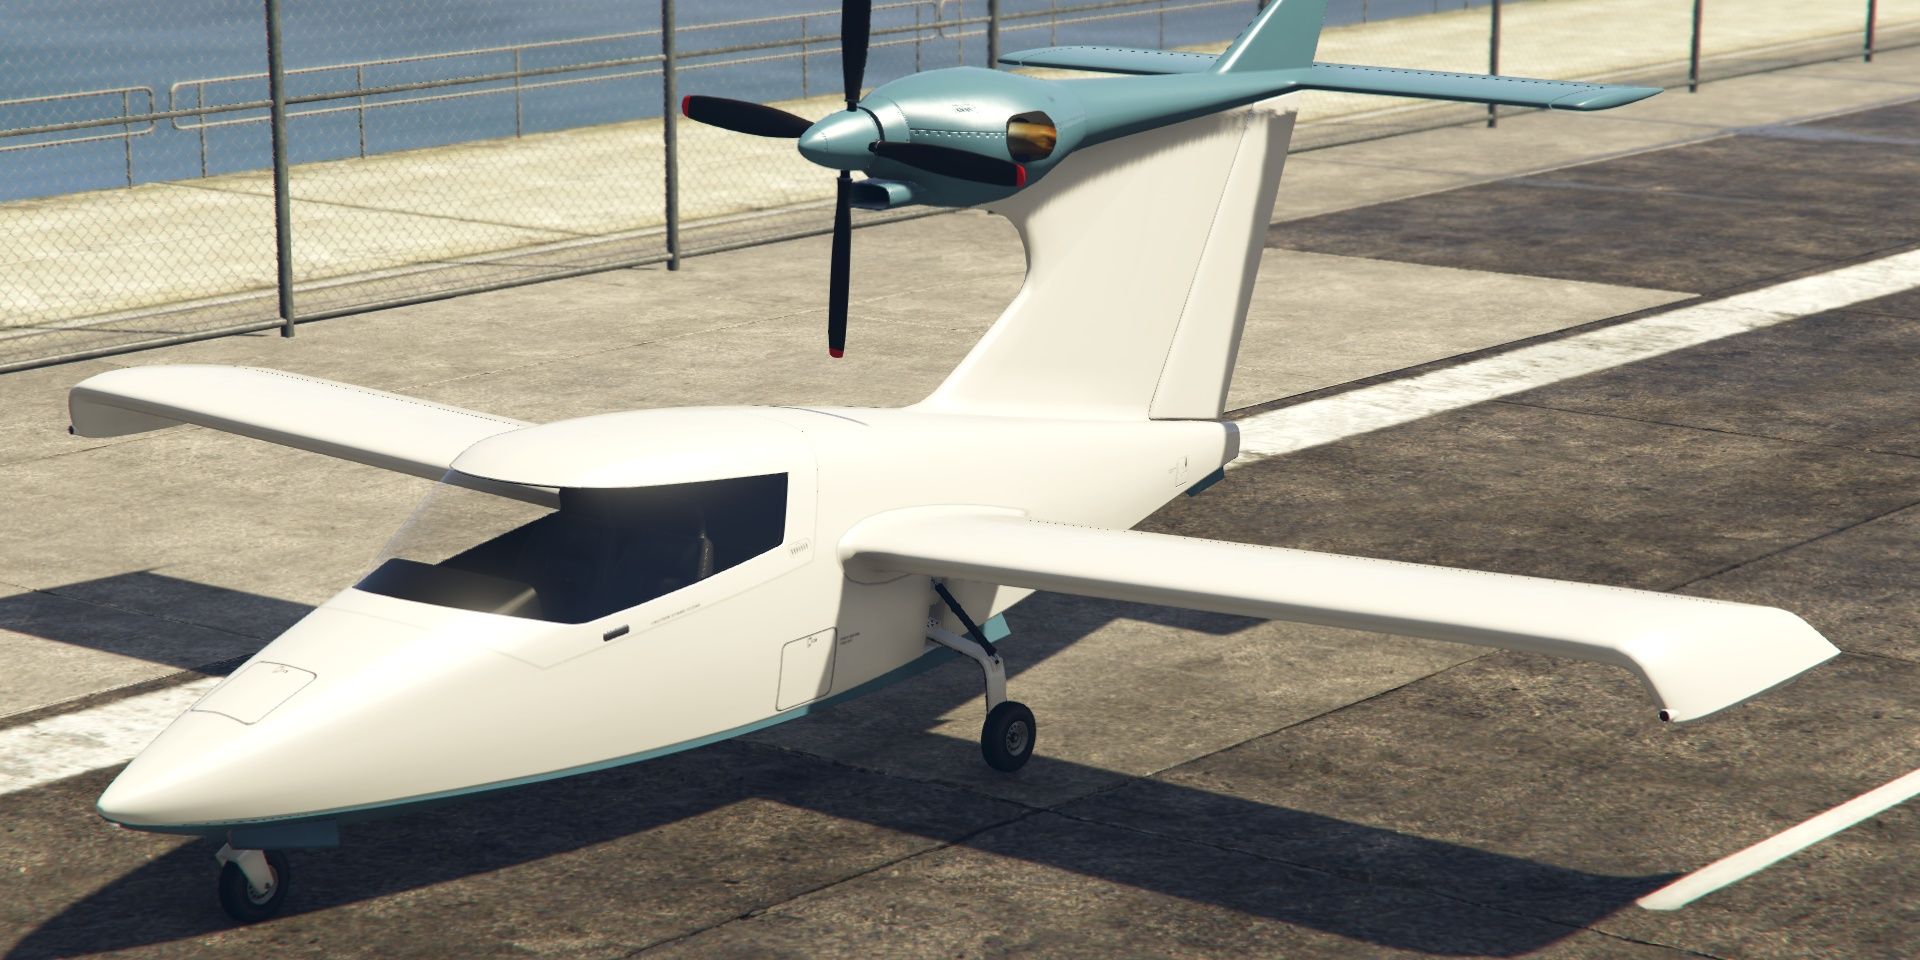 Grand Theft Auto Online: The Best Planes To Use